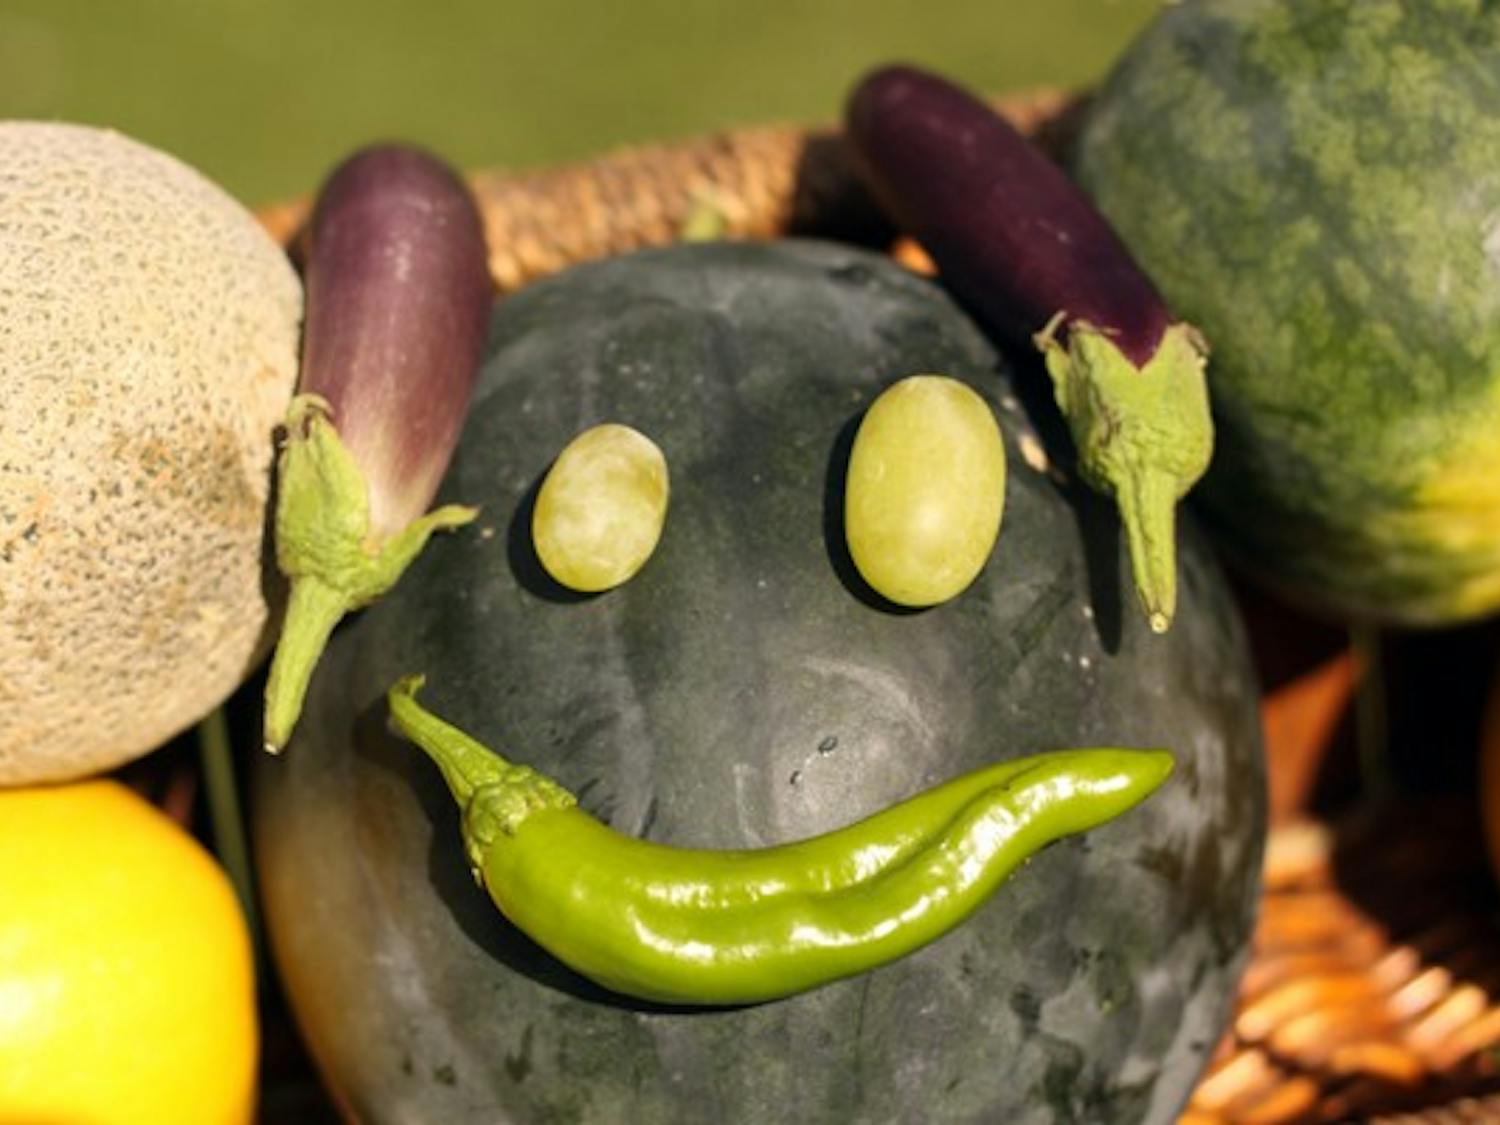 HAPPY FACE: Fruits and vegetables are arranged into a smiley face at the farmers market on the Tempe campus. (Photo by Lillian Reid) 